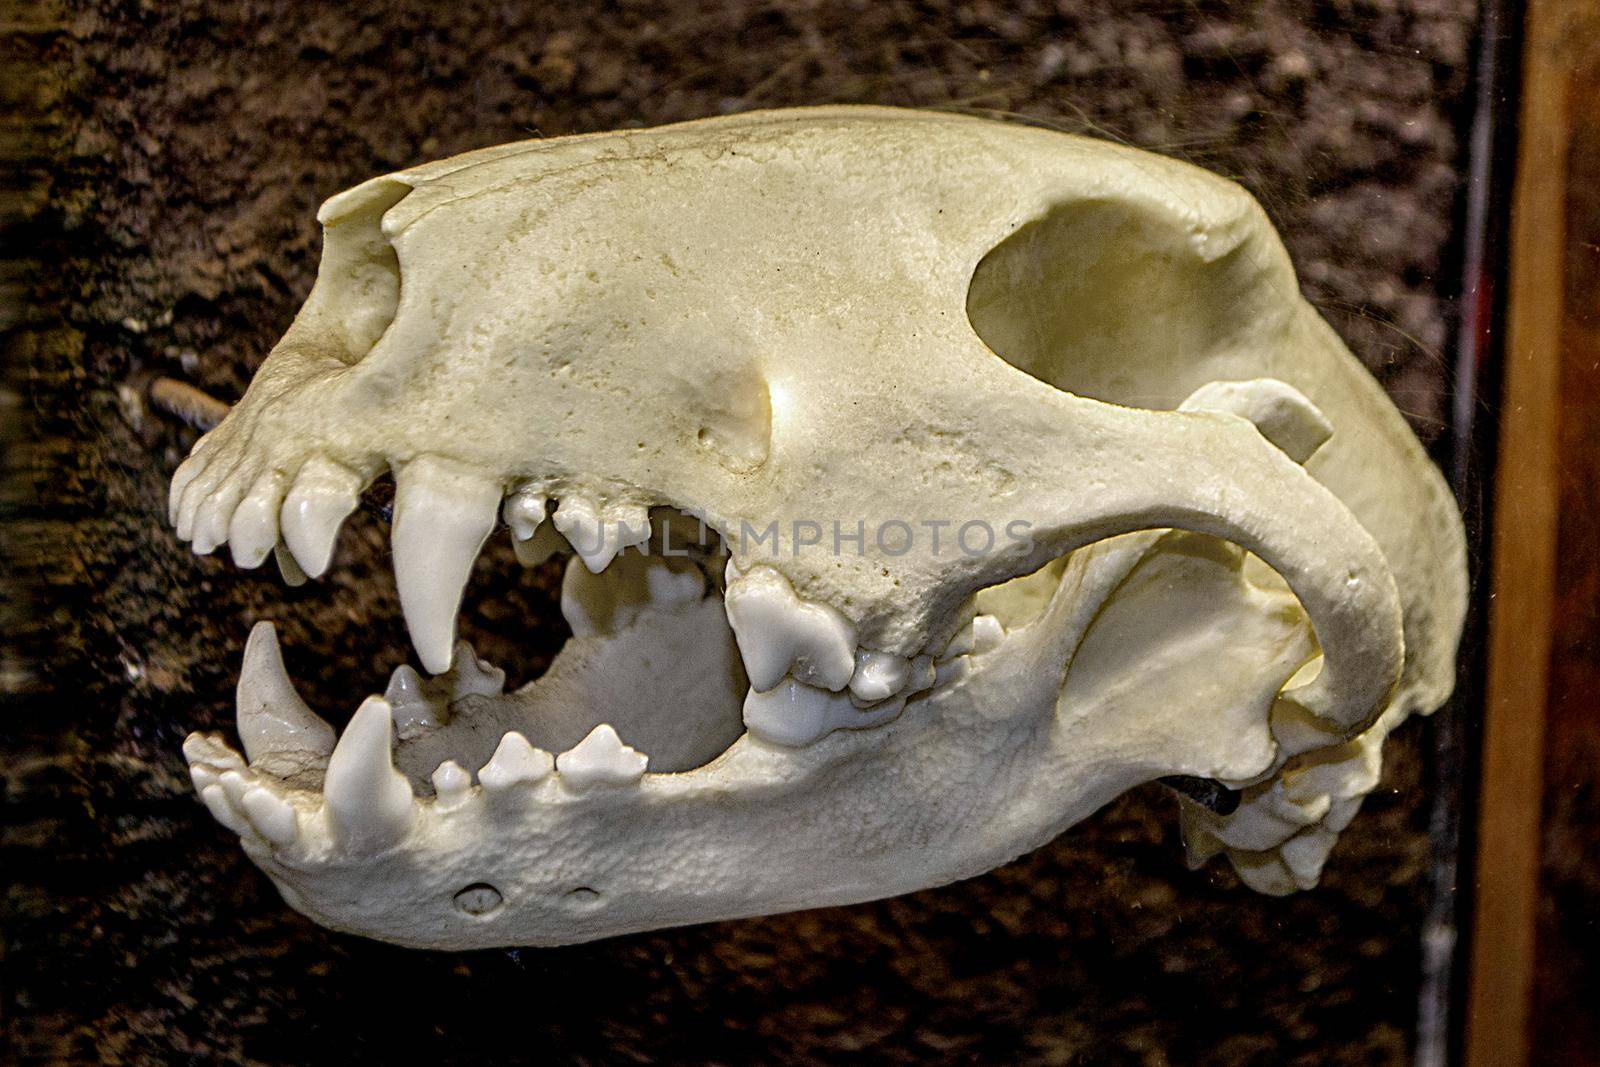 Dog skull on a rustic wooden table. High quality photo